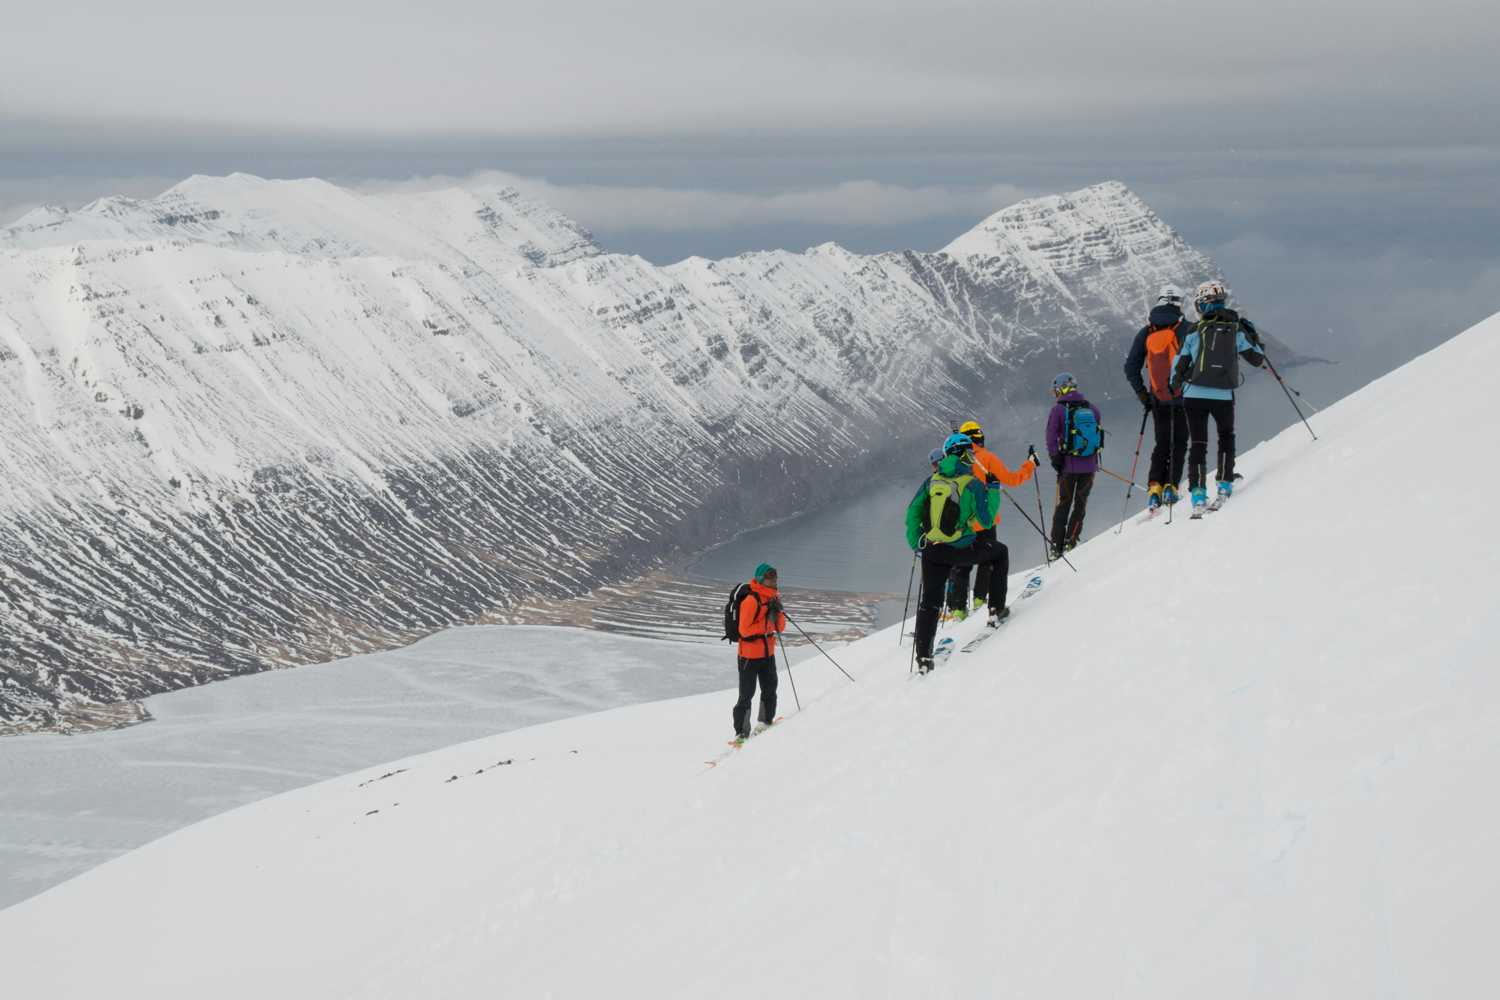 All About Ski Touring in Iceland